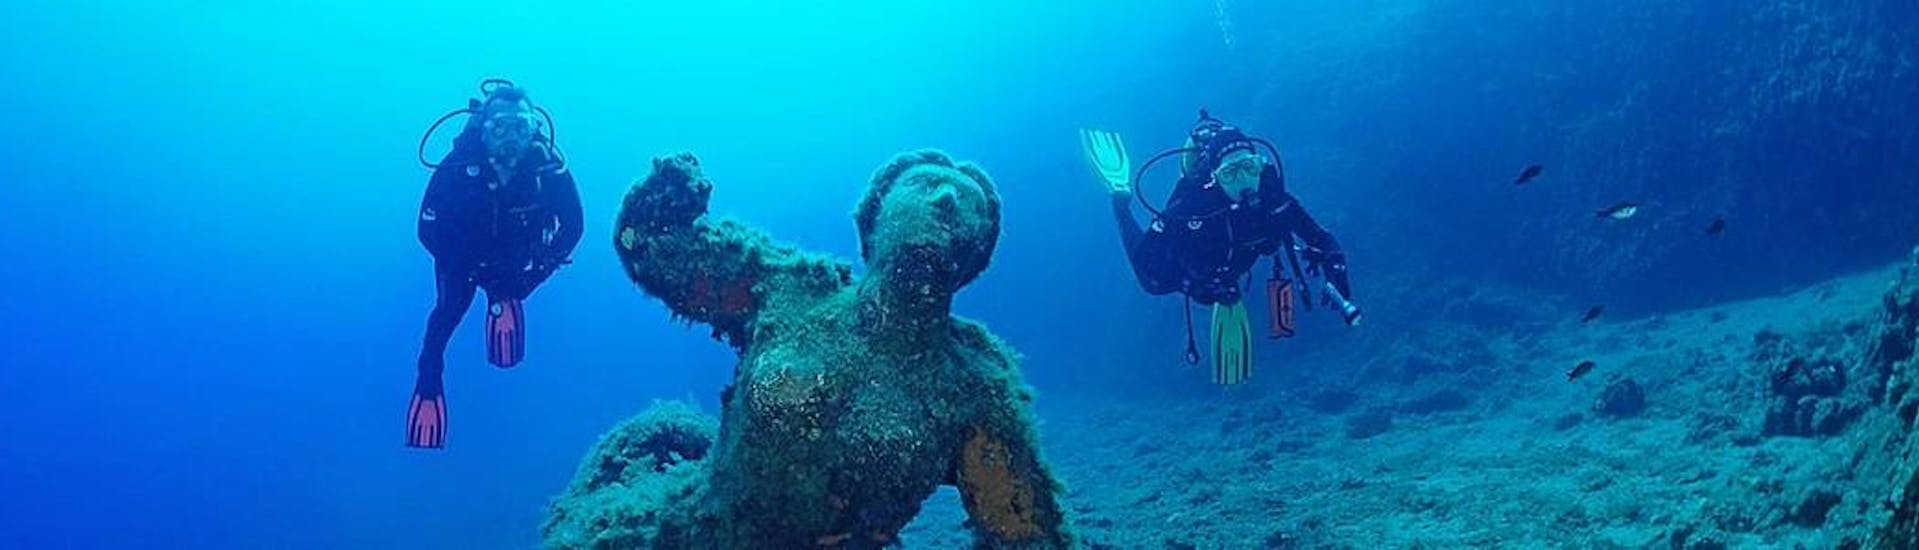 A beginner diver and his instructor discover the underwater scenery during the first dive at Lion de Mer with Aventure Sous-Marine Saint-Raphaël.